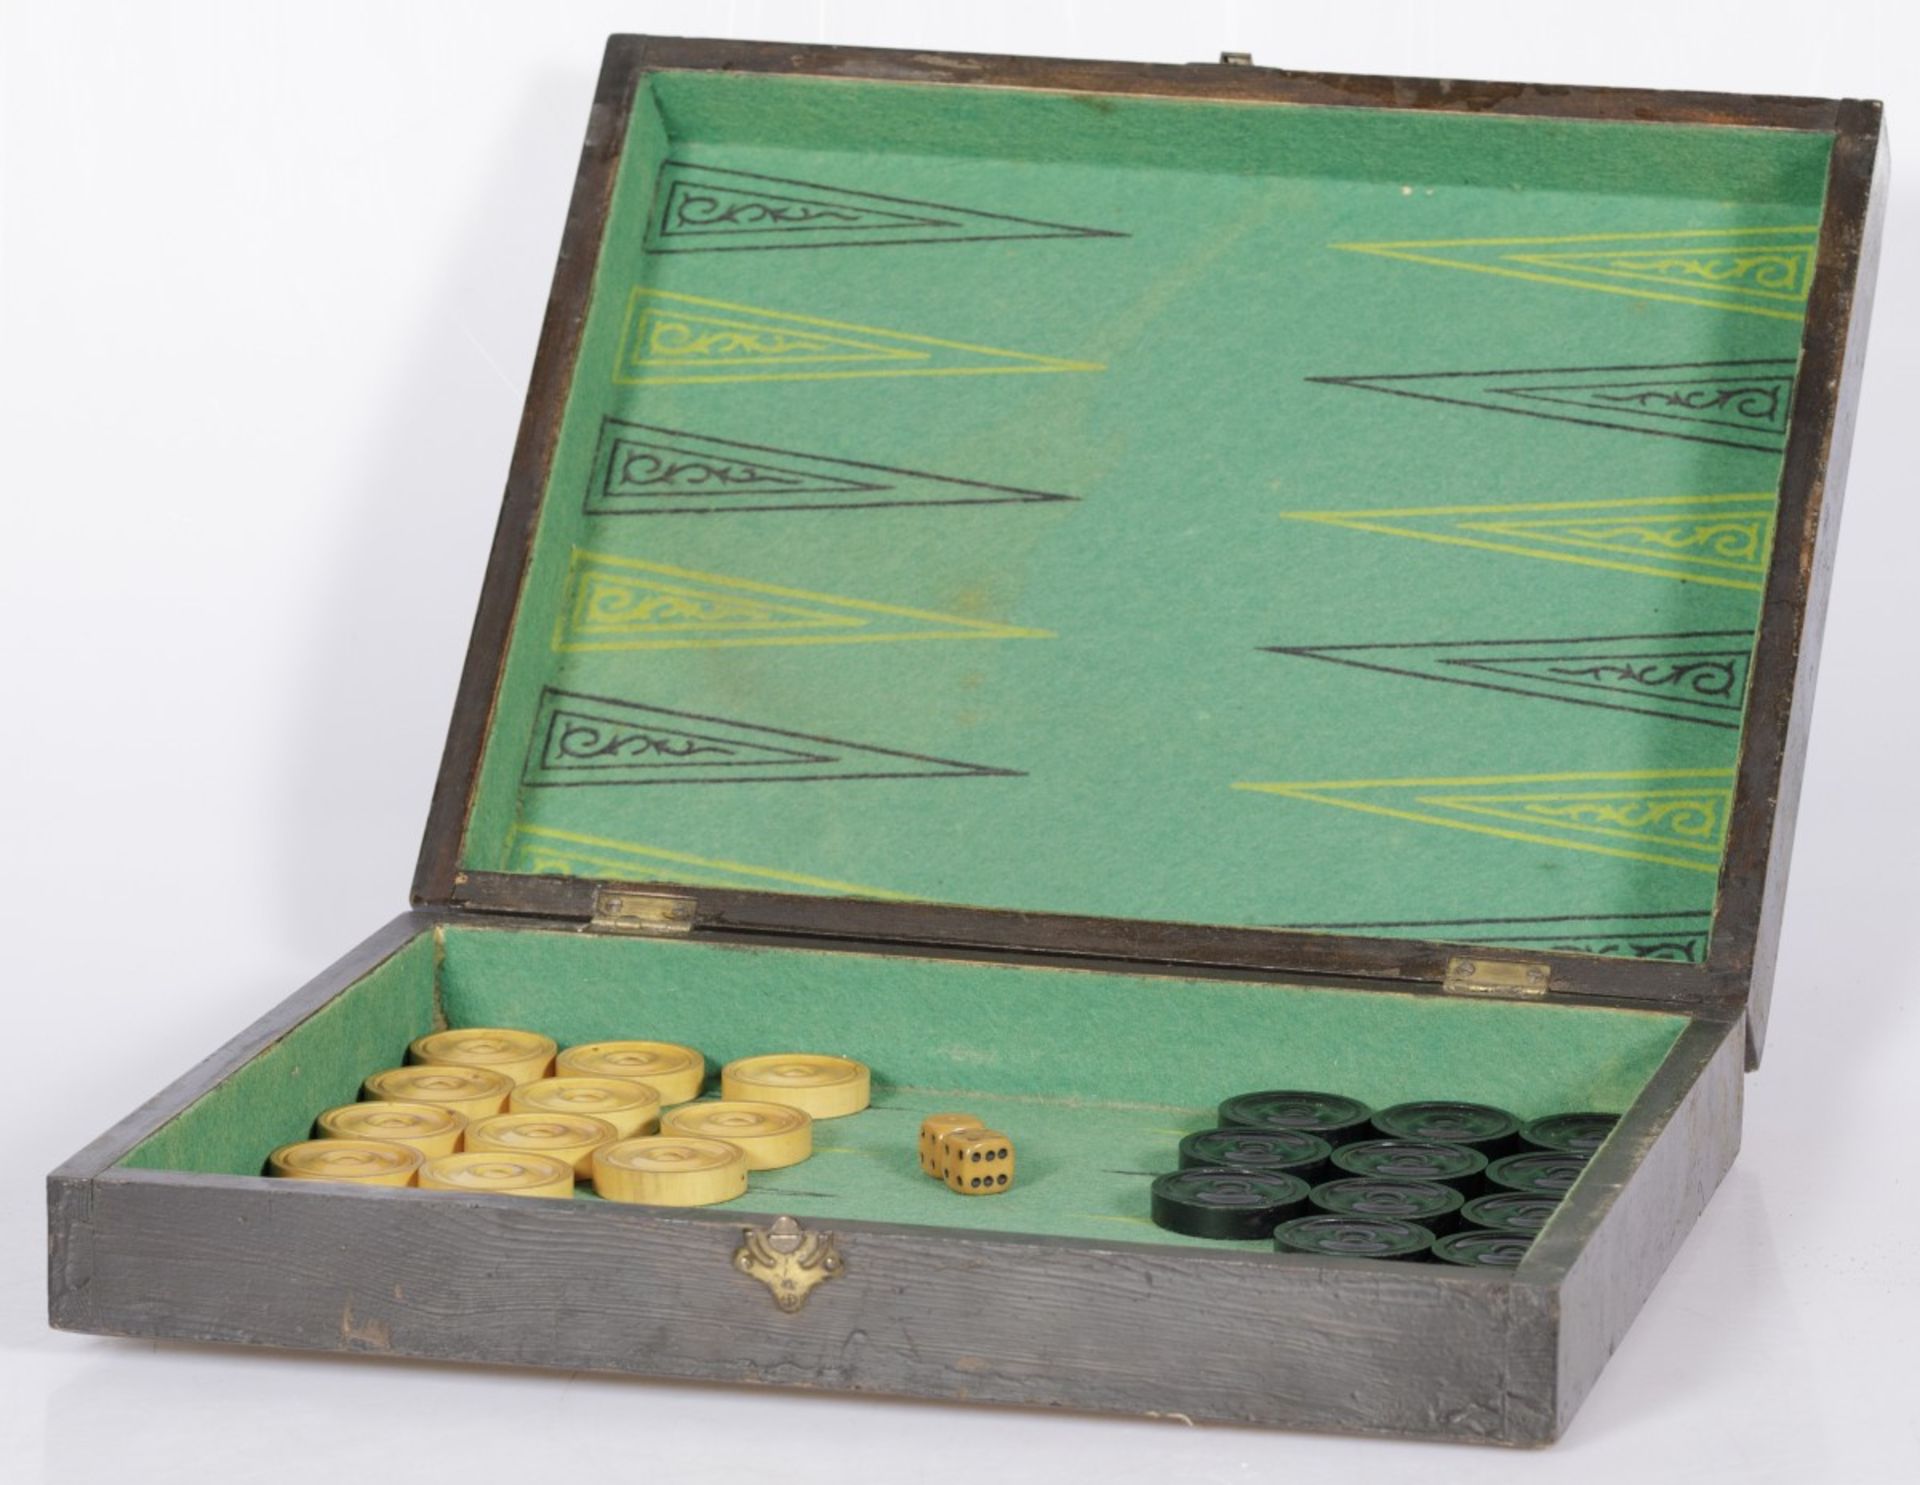 A back-gammon game, first half 20th century.